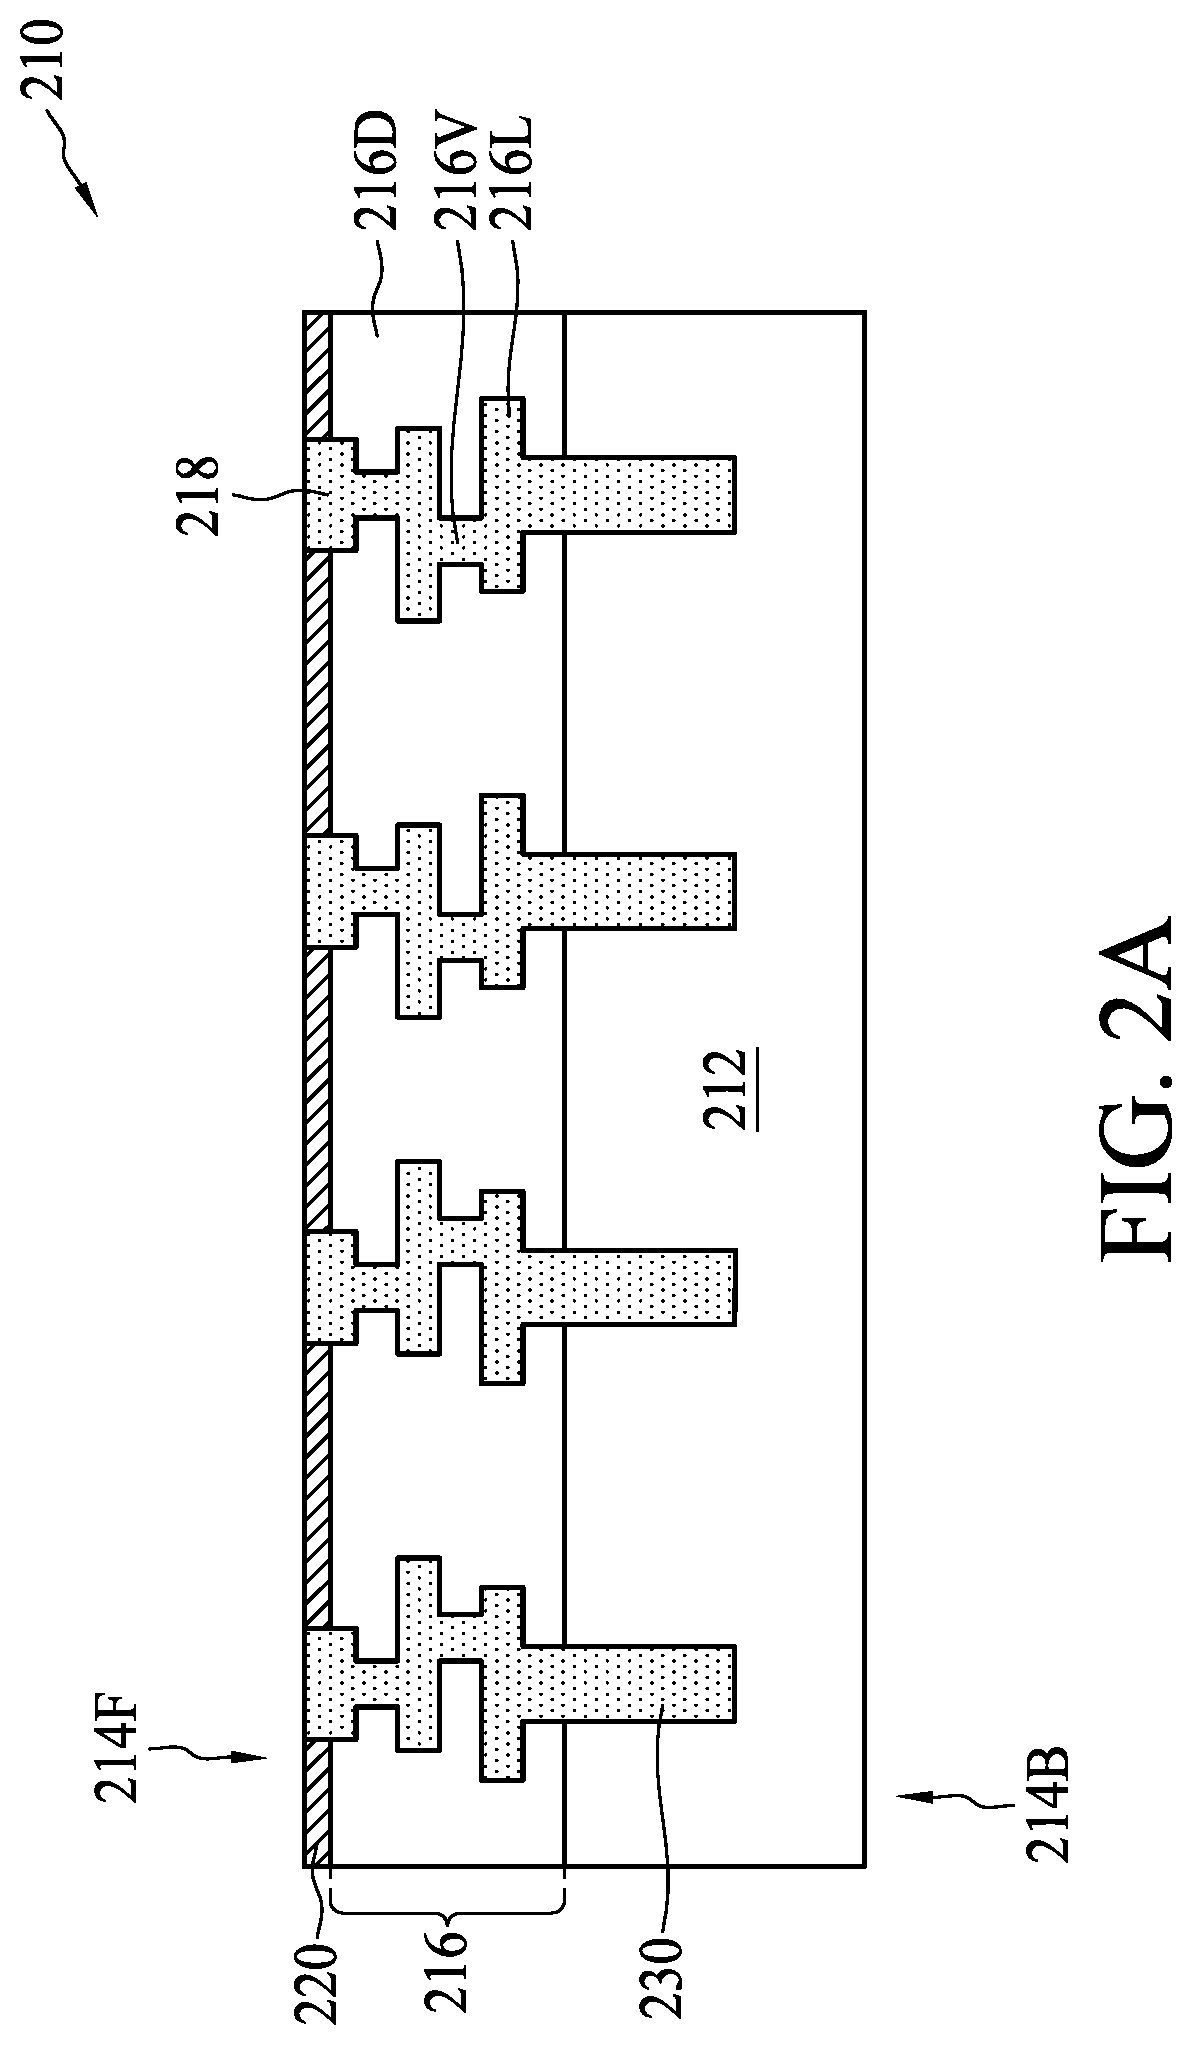 Semiconductor package including hybrid bonding structure and method for preparing the same